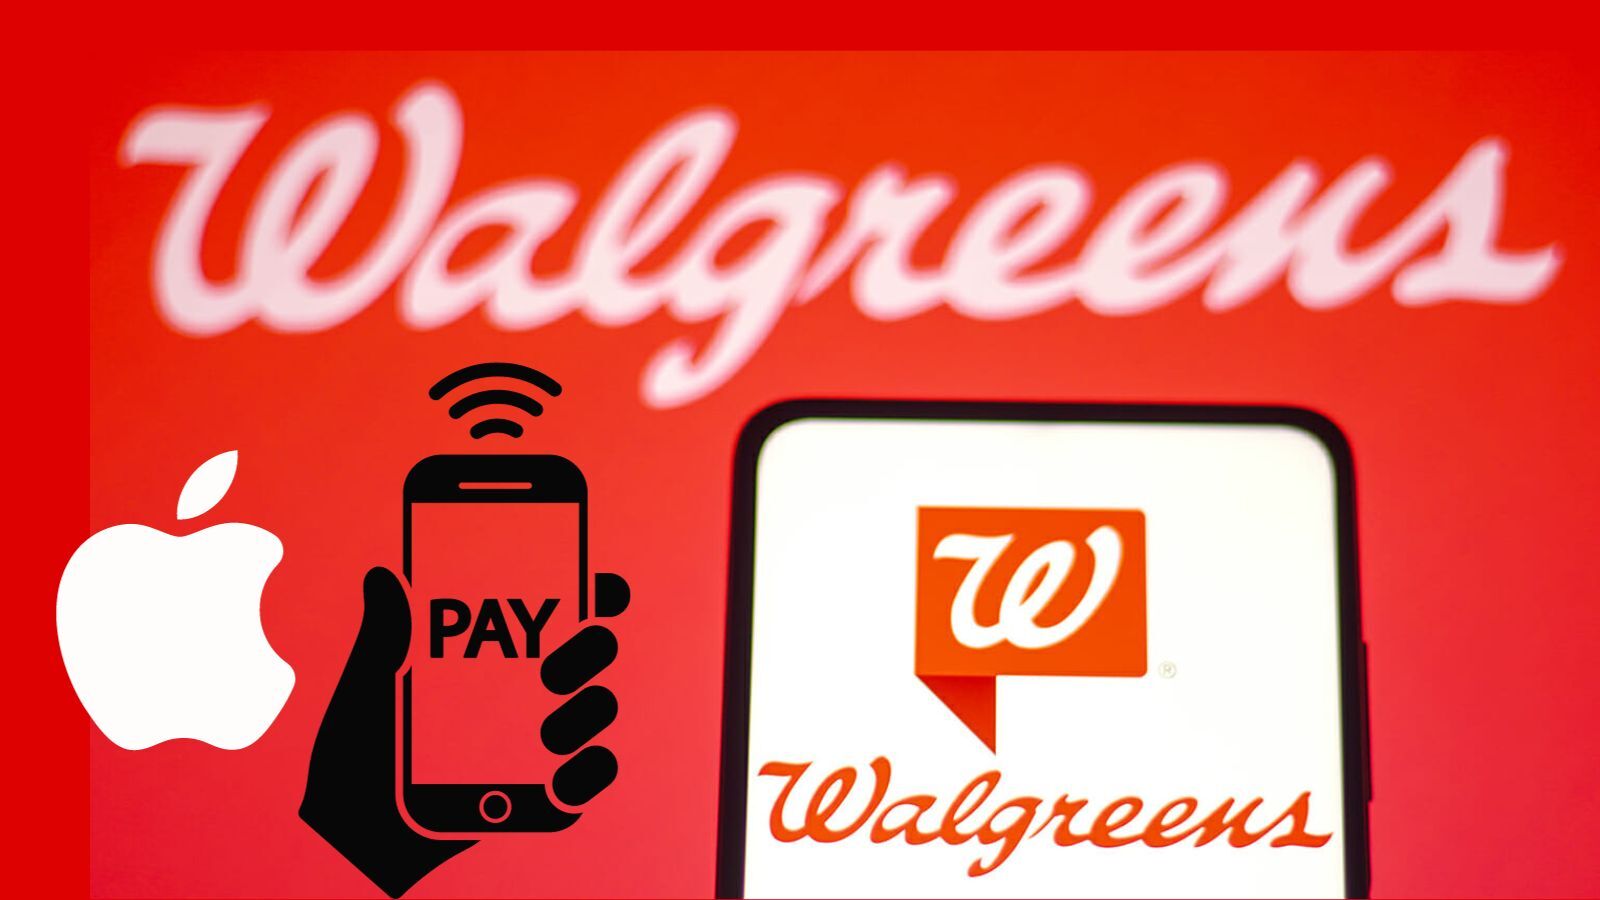 Does Walgreens Take Apple Pay? (Yes, Here Is the Full Guide)